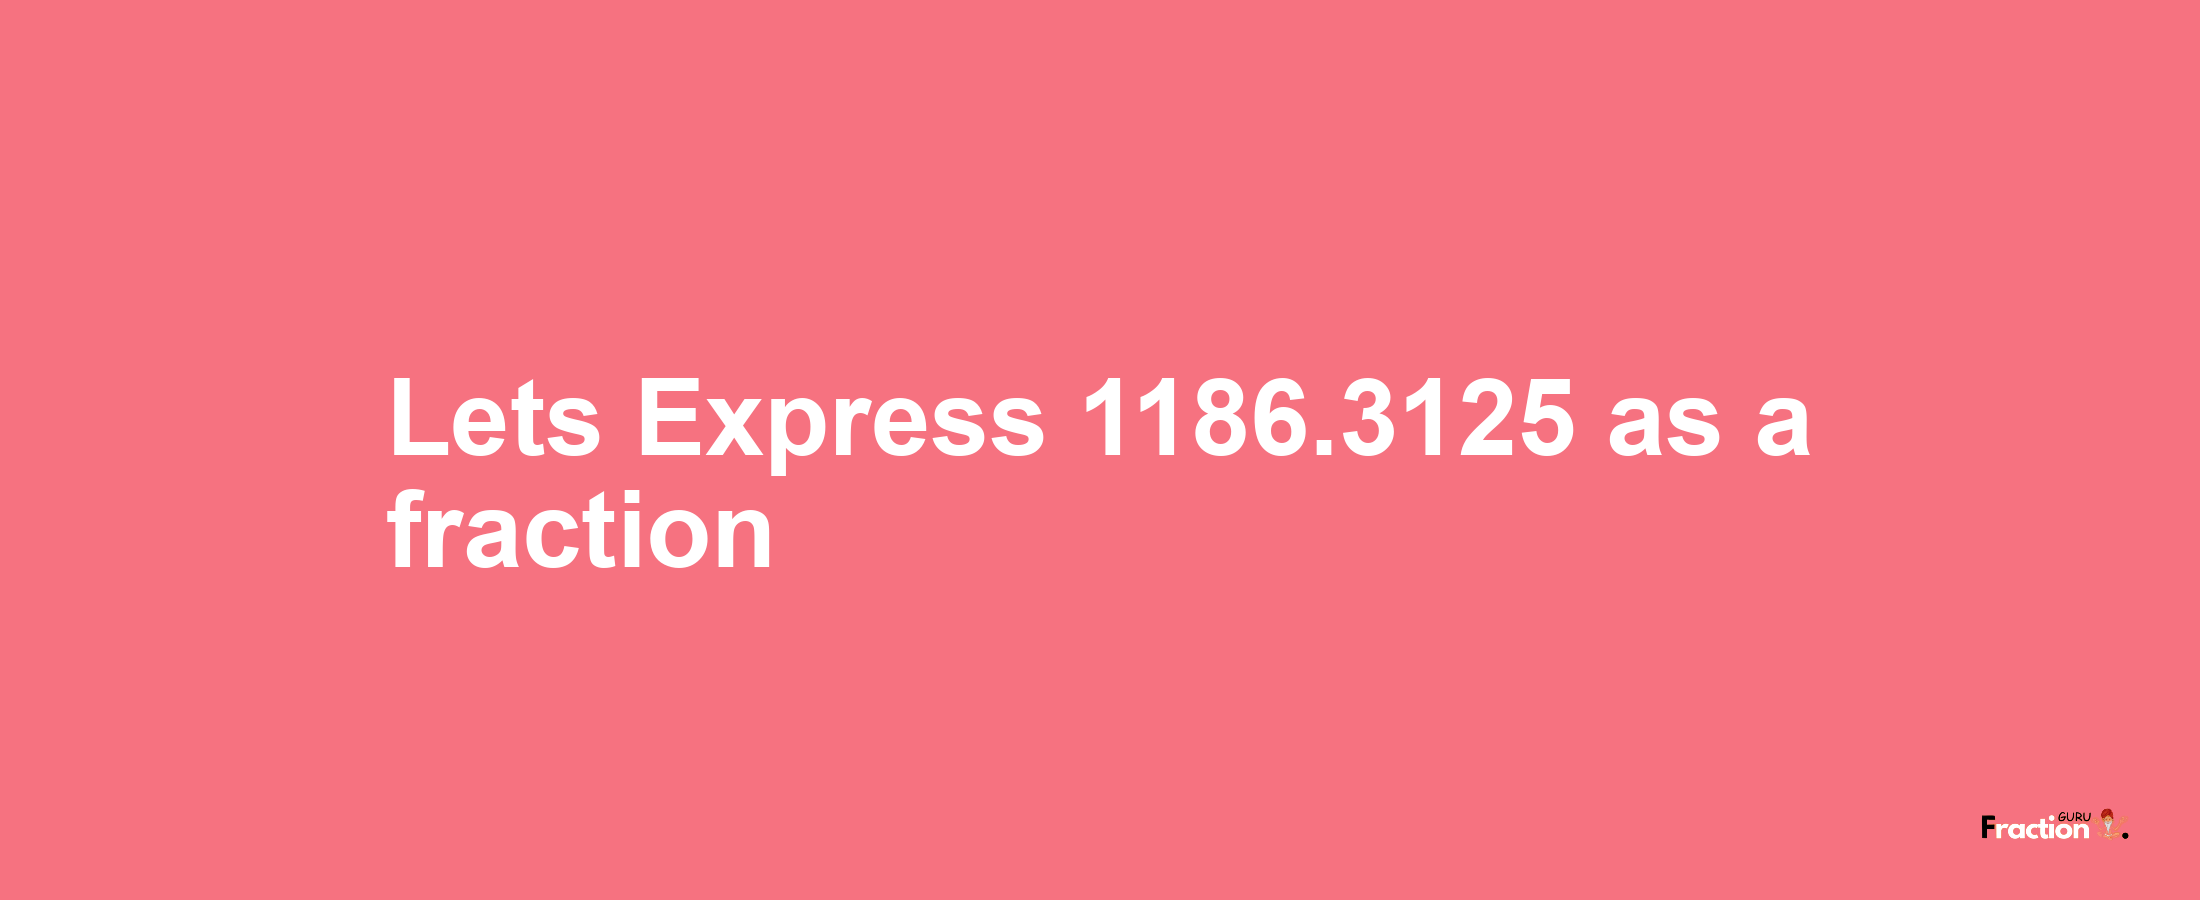 Lets Express 1186.3125 as afraction